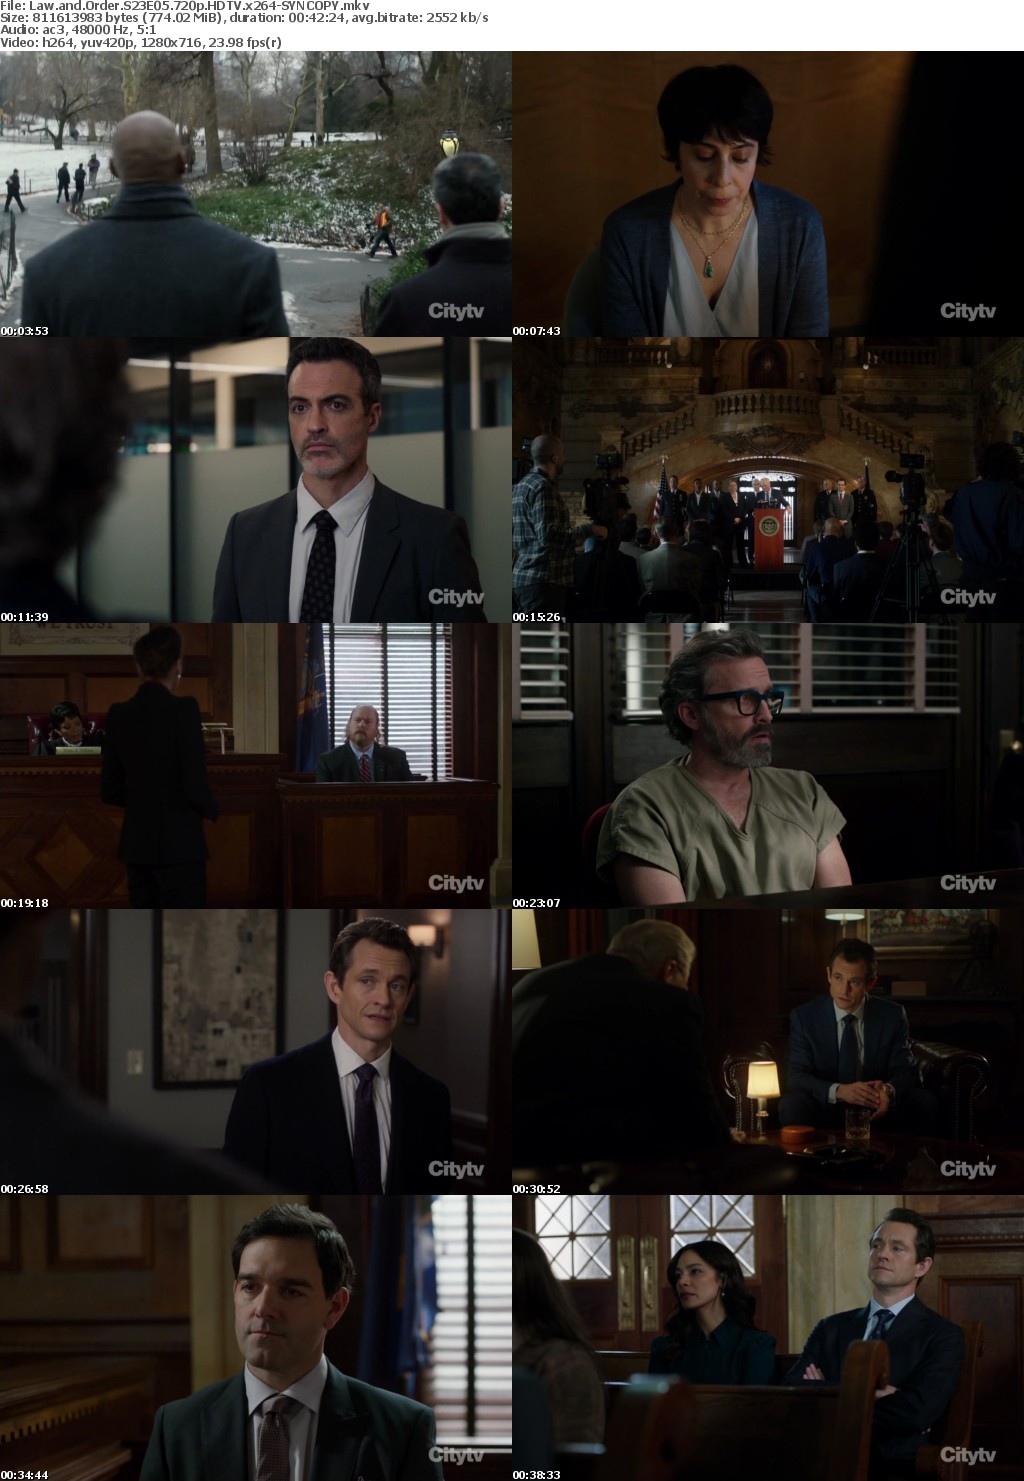 Law and Order S23E05 720p HDTV x264-SYNCOPY